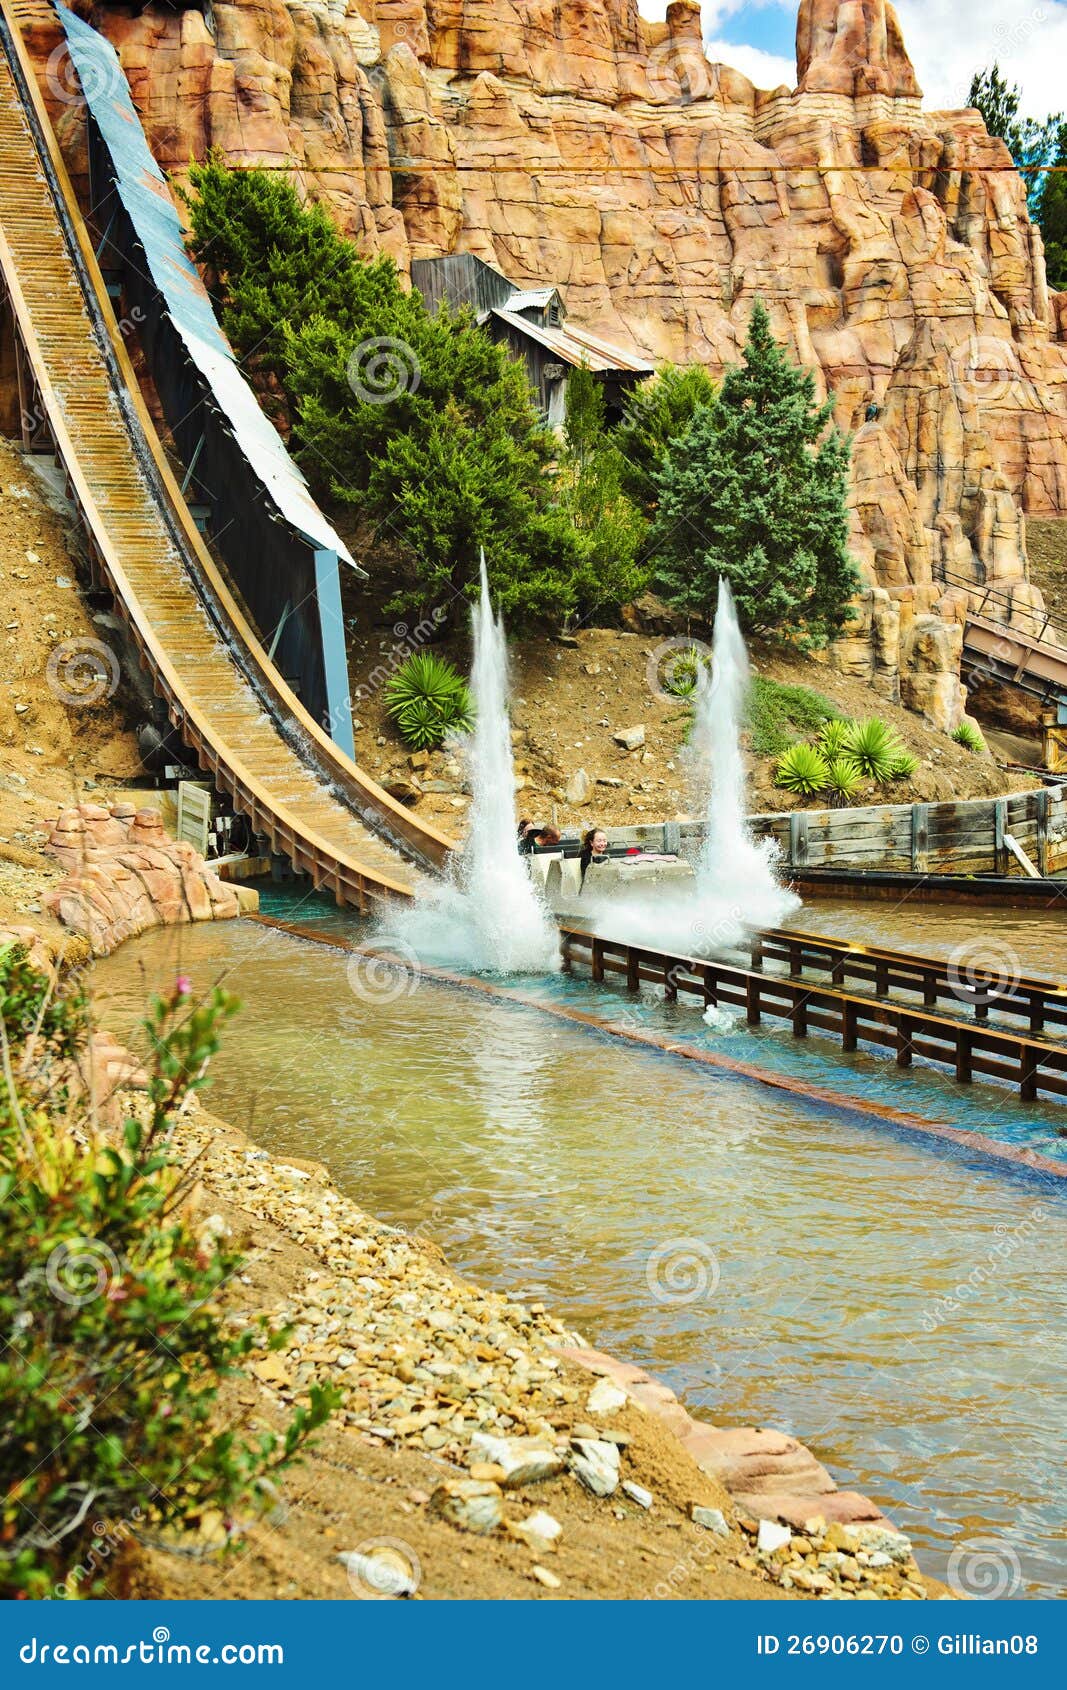 water flume ride